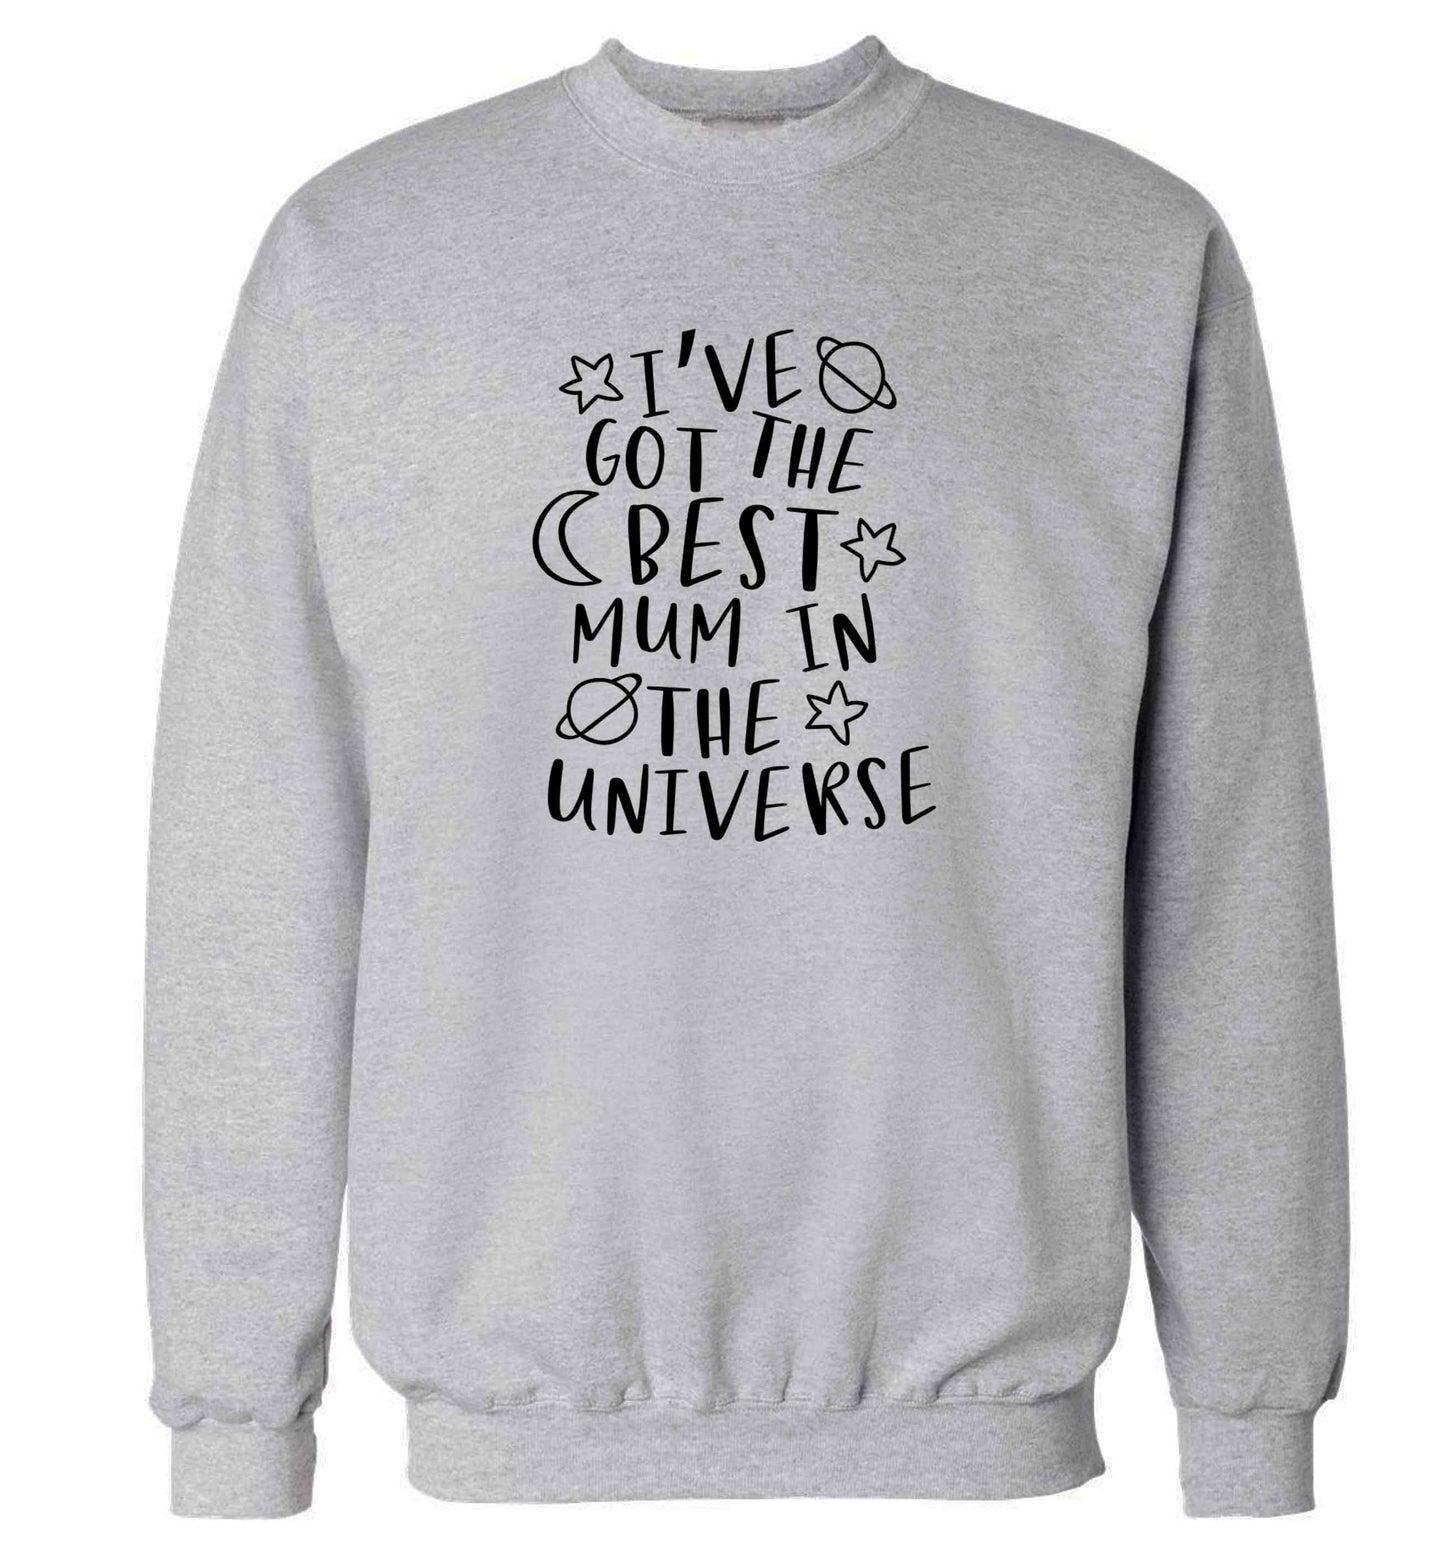 I've got the best mum in the universe adult's unisex grey sweater 2XL